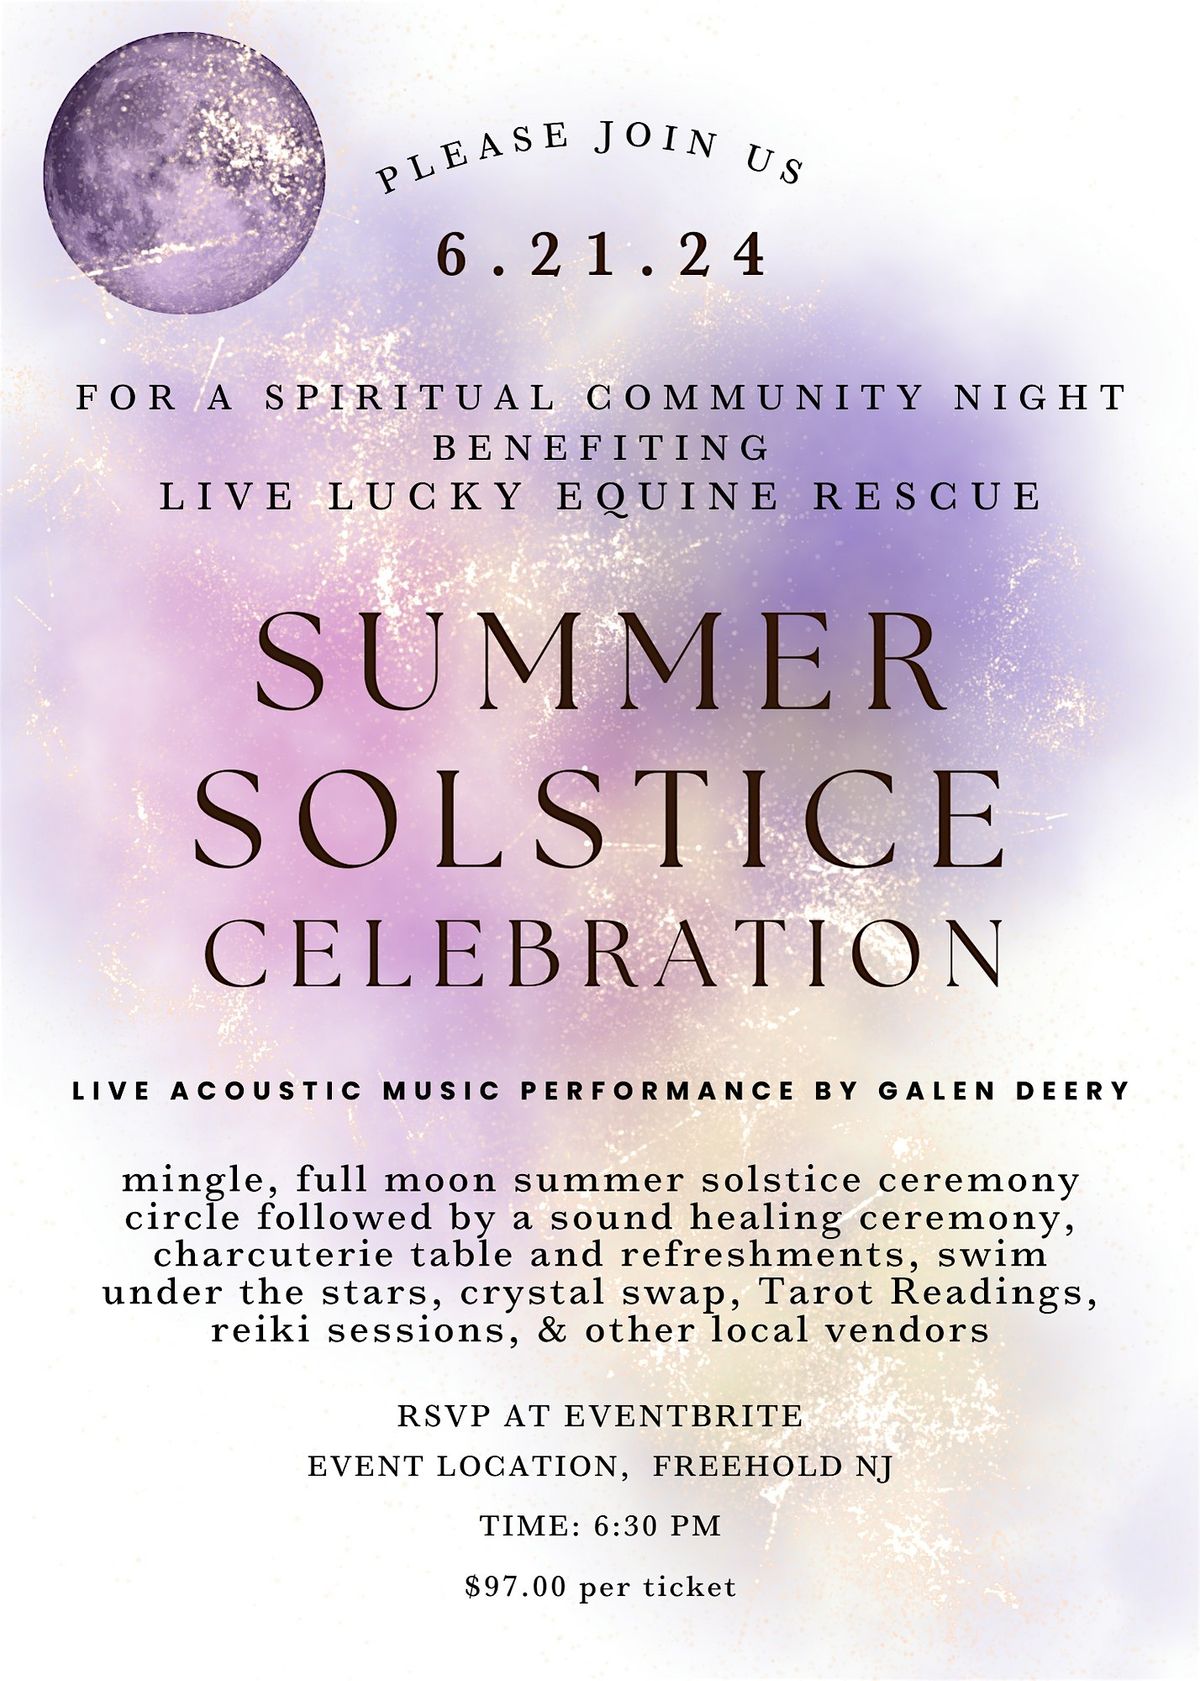 Summer Solstice Celebration, Benefiting Live Lucky Equine Rescue